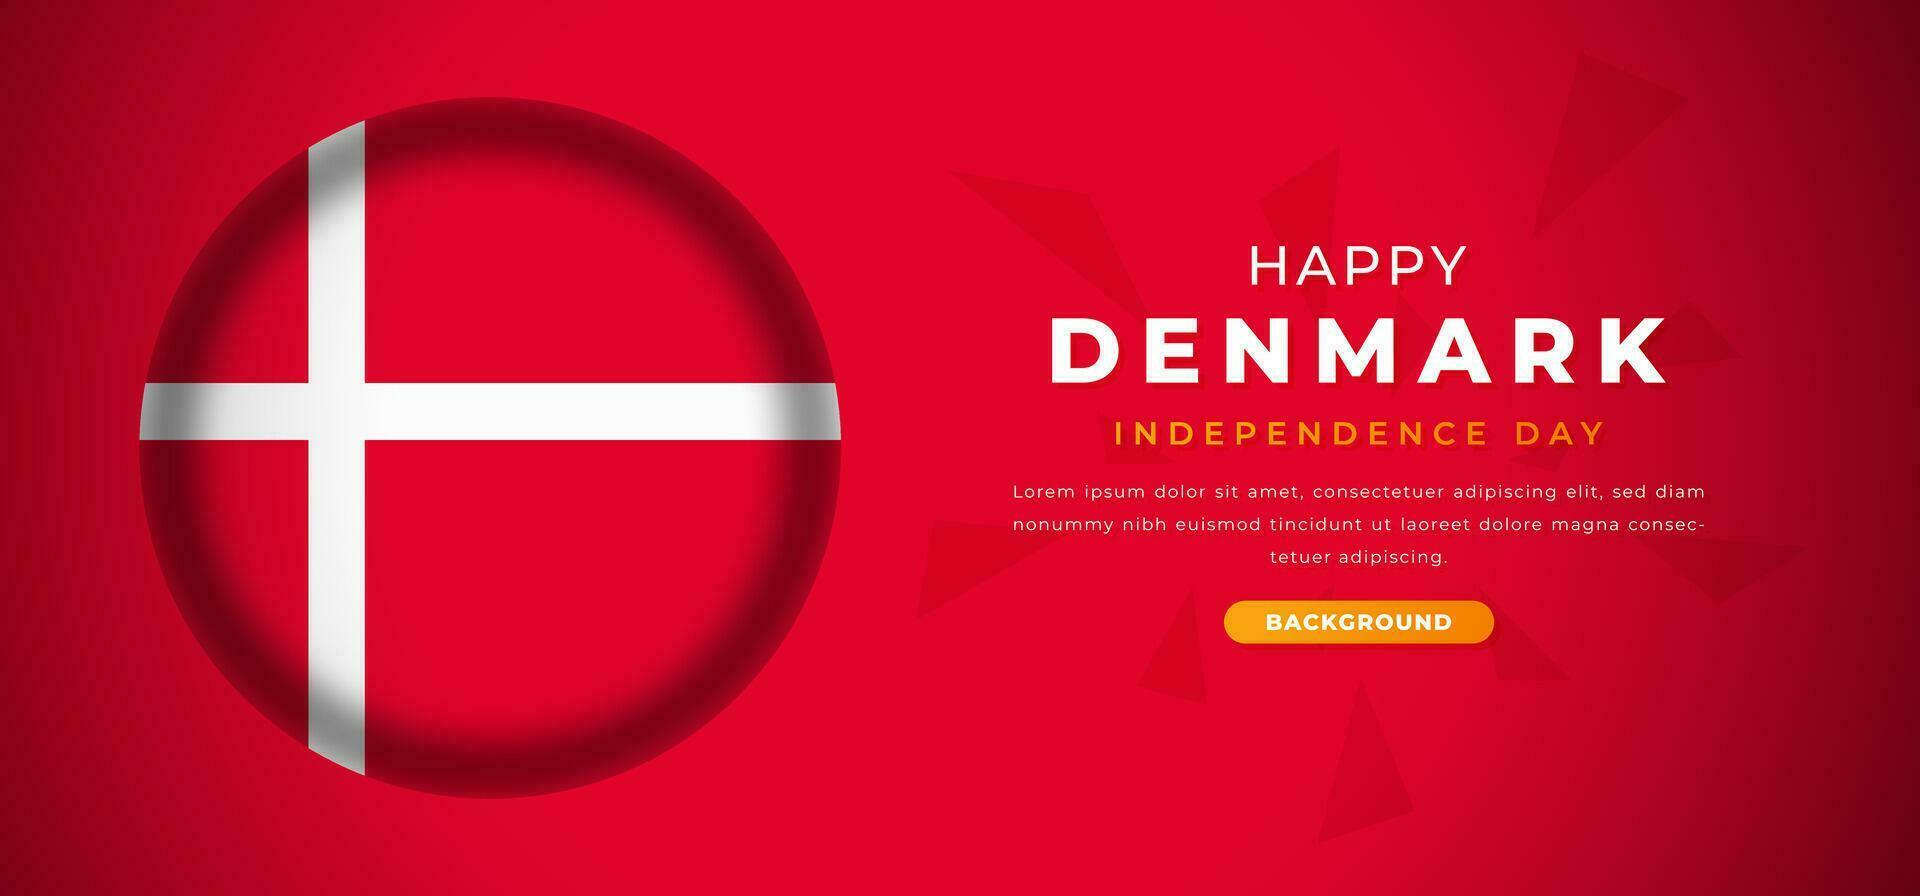 Happy Denmark Independence Day Design Paper Cut Shapes Background Illustration for Poster, Banner, Advertising, Greeting Card vector